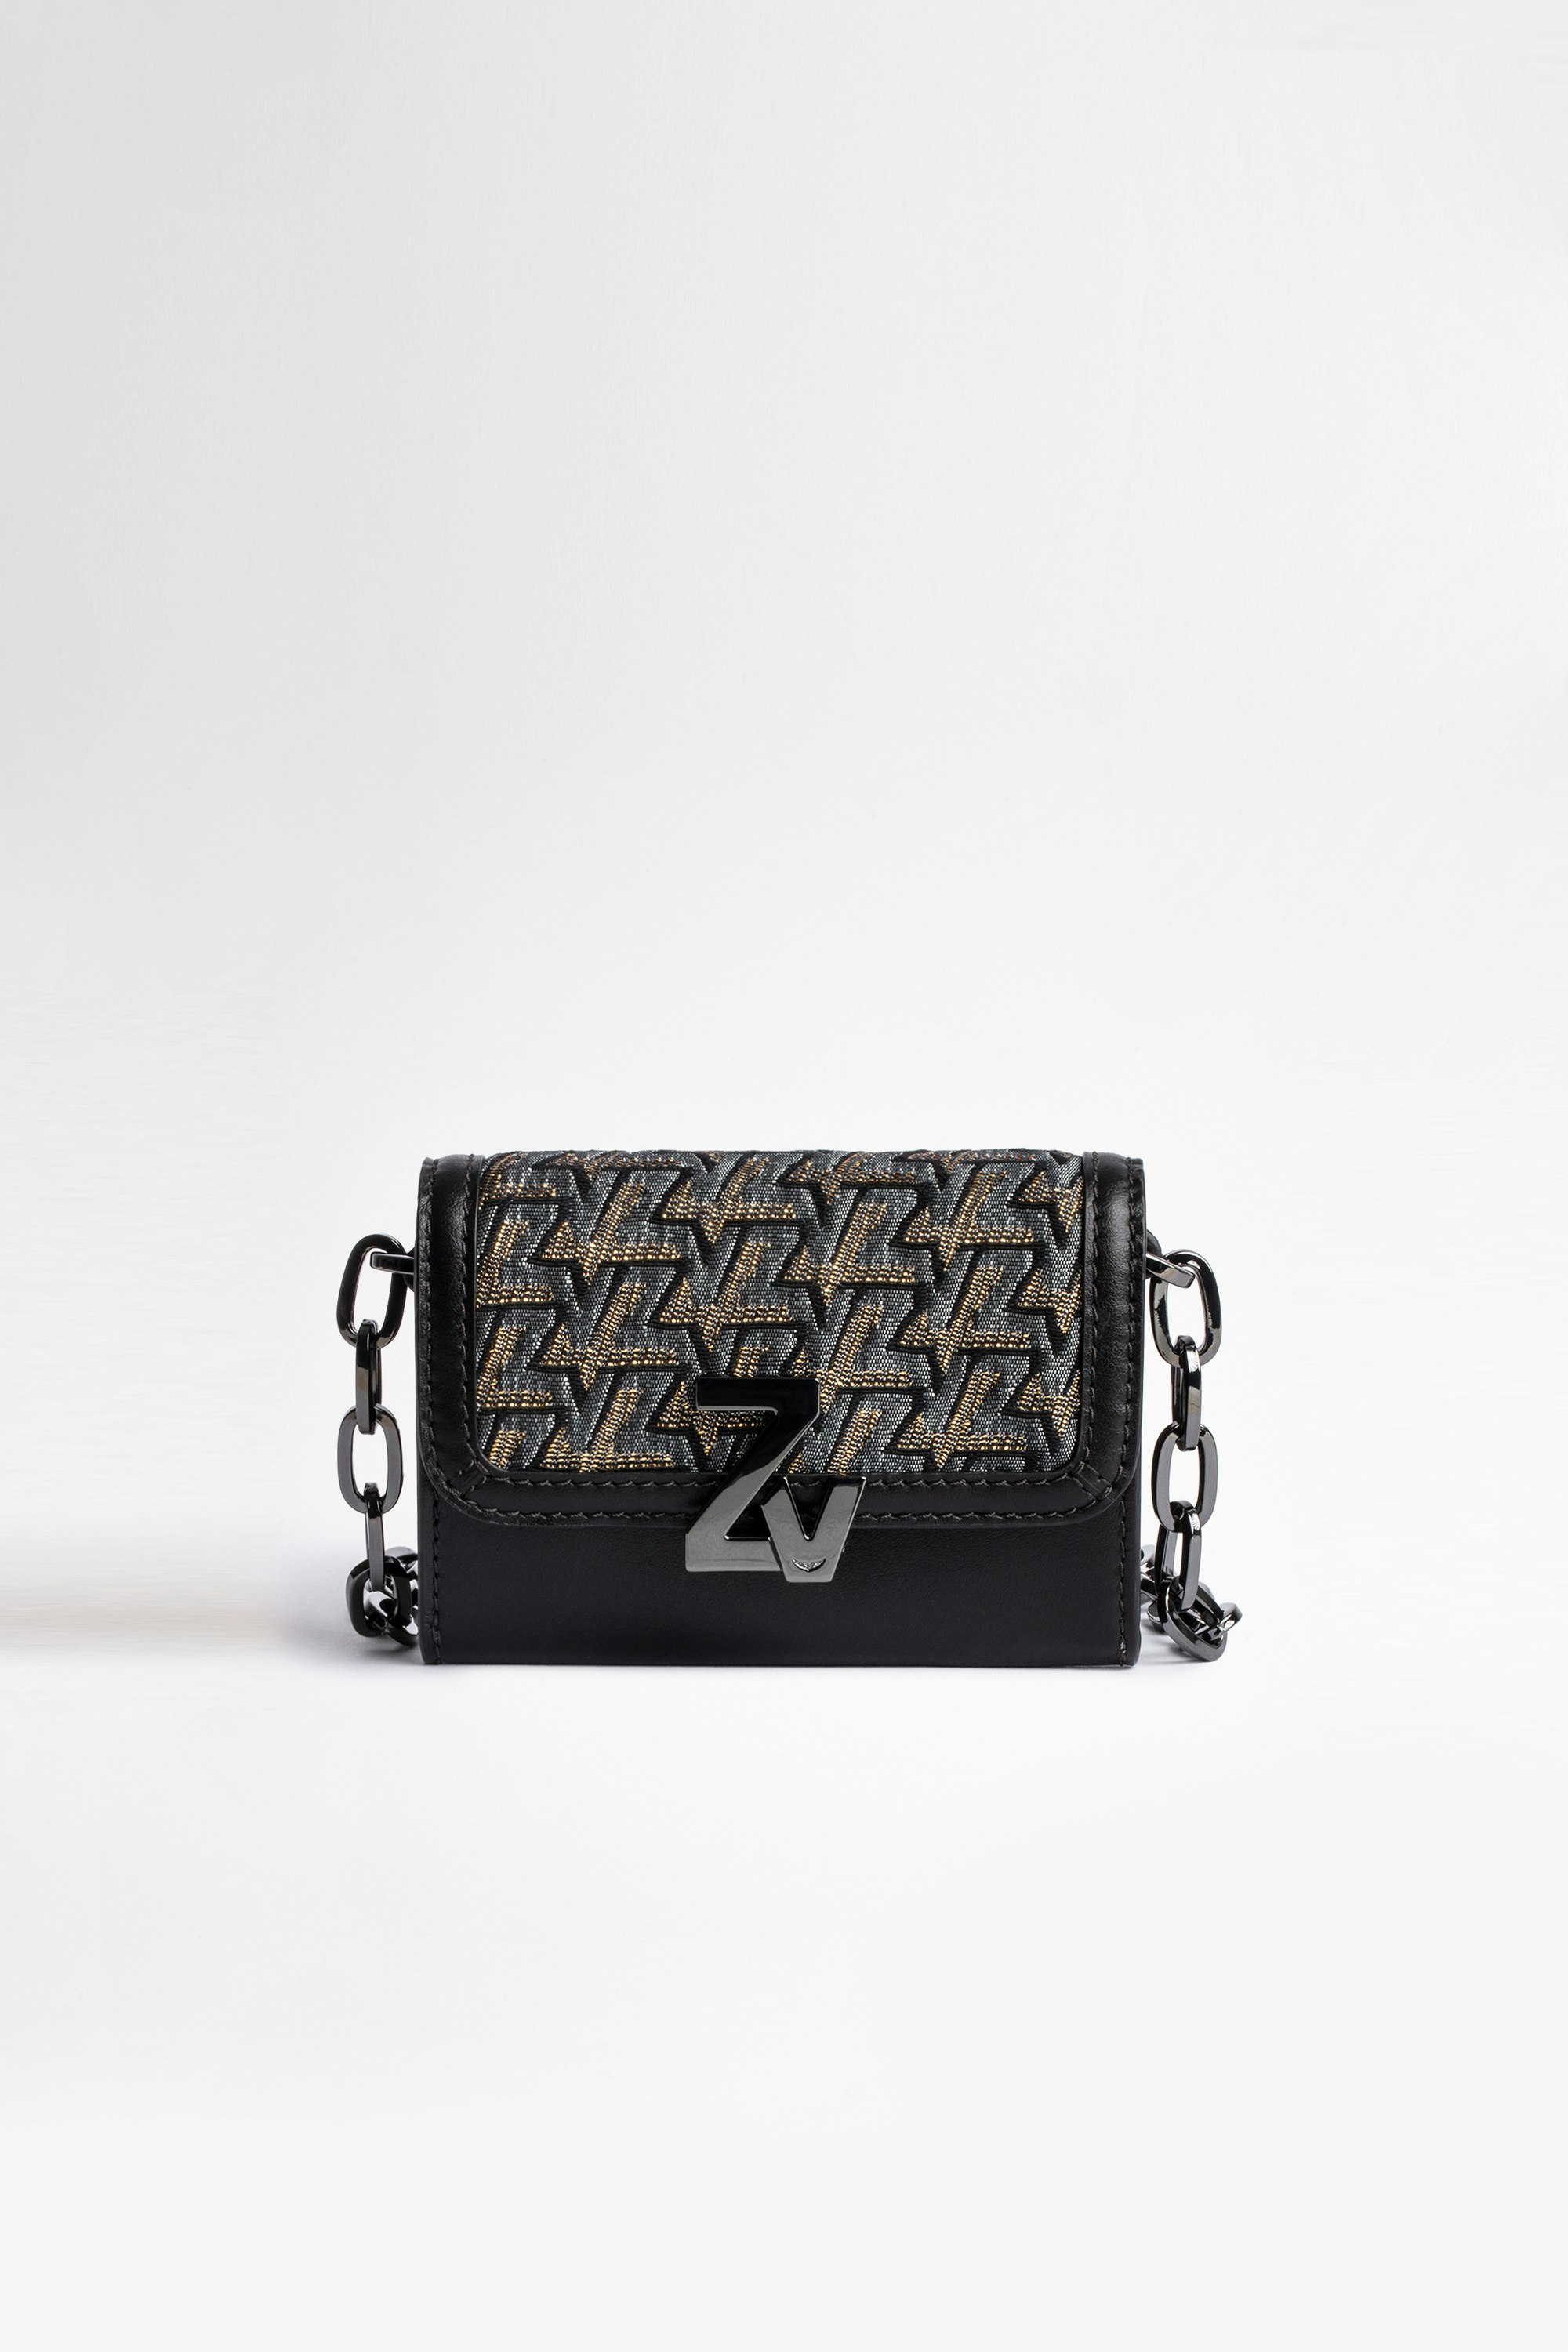 ZV Initiale Le Tiny Unchained 財布 Women's clutch bag in leather and ZV street jacquard